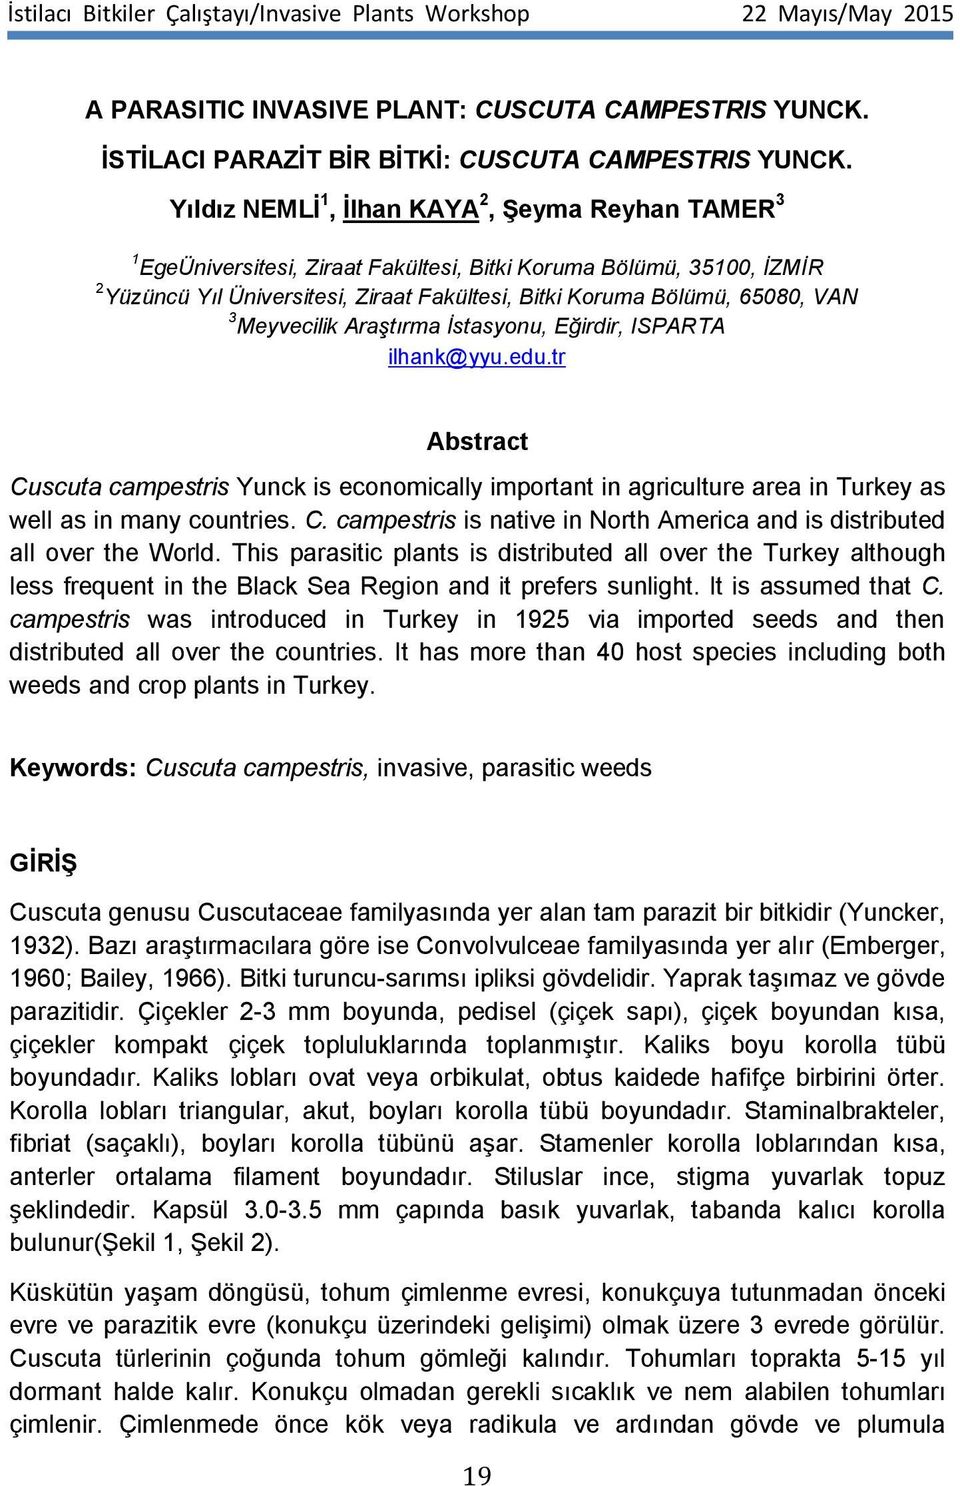 3 Meyvecilik Araştırma İstasyonu, Eğirdir, ISPARTA ilhank@yyu.edu.tr Abstract Cuscuta campestris Yunck is economically important in agriculture area in Turkey as well as in many countries. C. campestris is native in North America and is distributed all over the World.